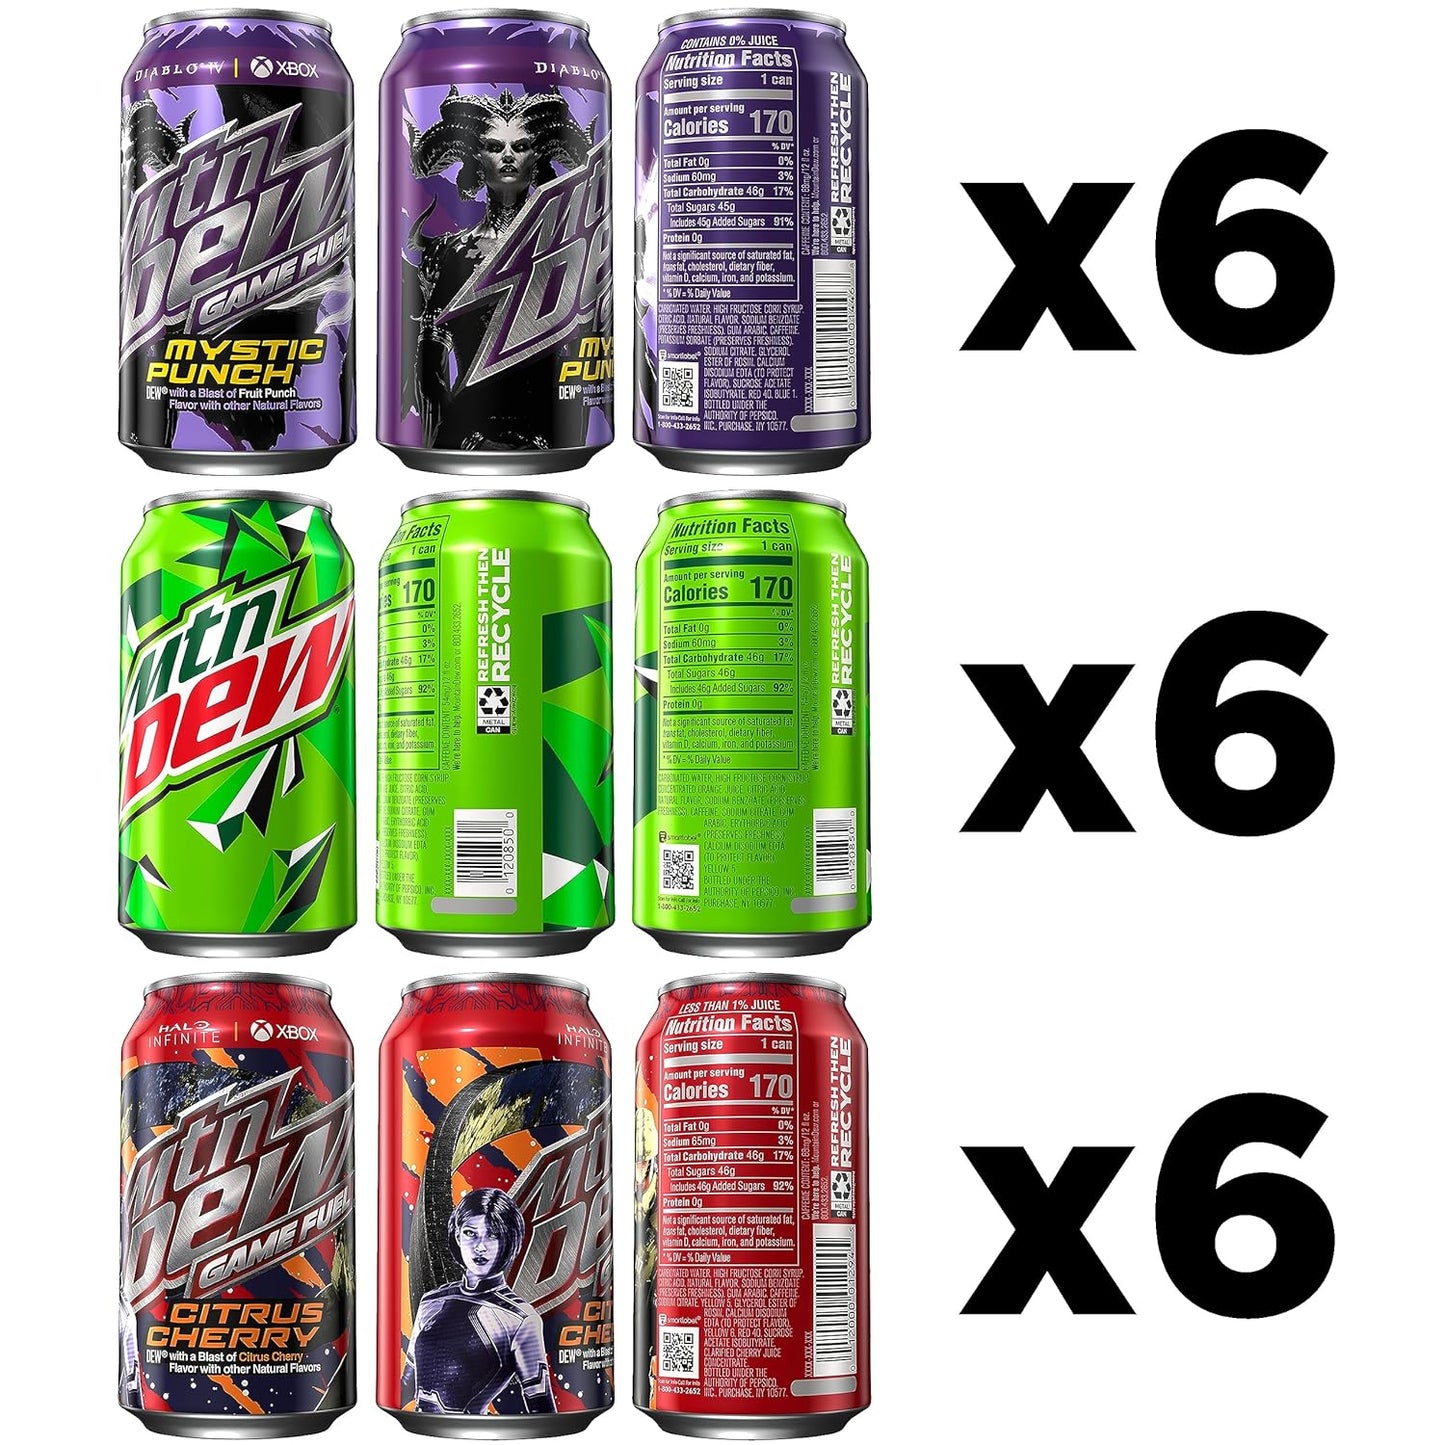 Mountain Dew Game Fuel 3 Flavor Variety Pack (Citrus Cherry, Mystic Punch, Original Dew), 12 Fl Oz (Pack of 18), Limited Time Offer